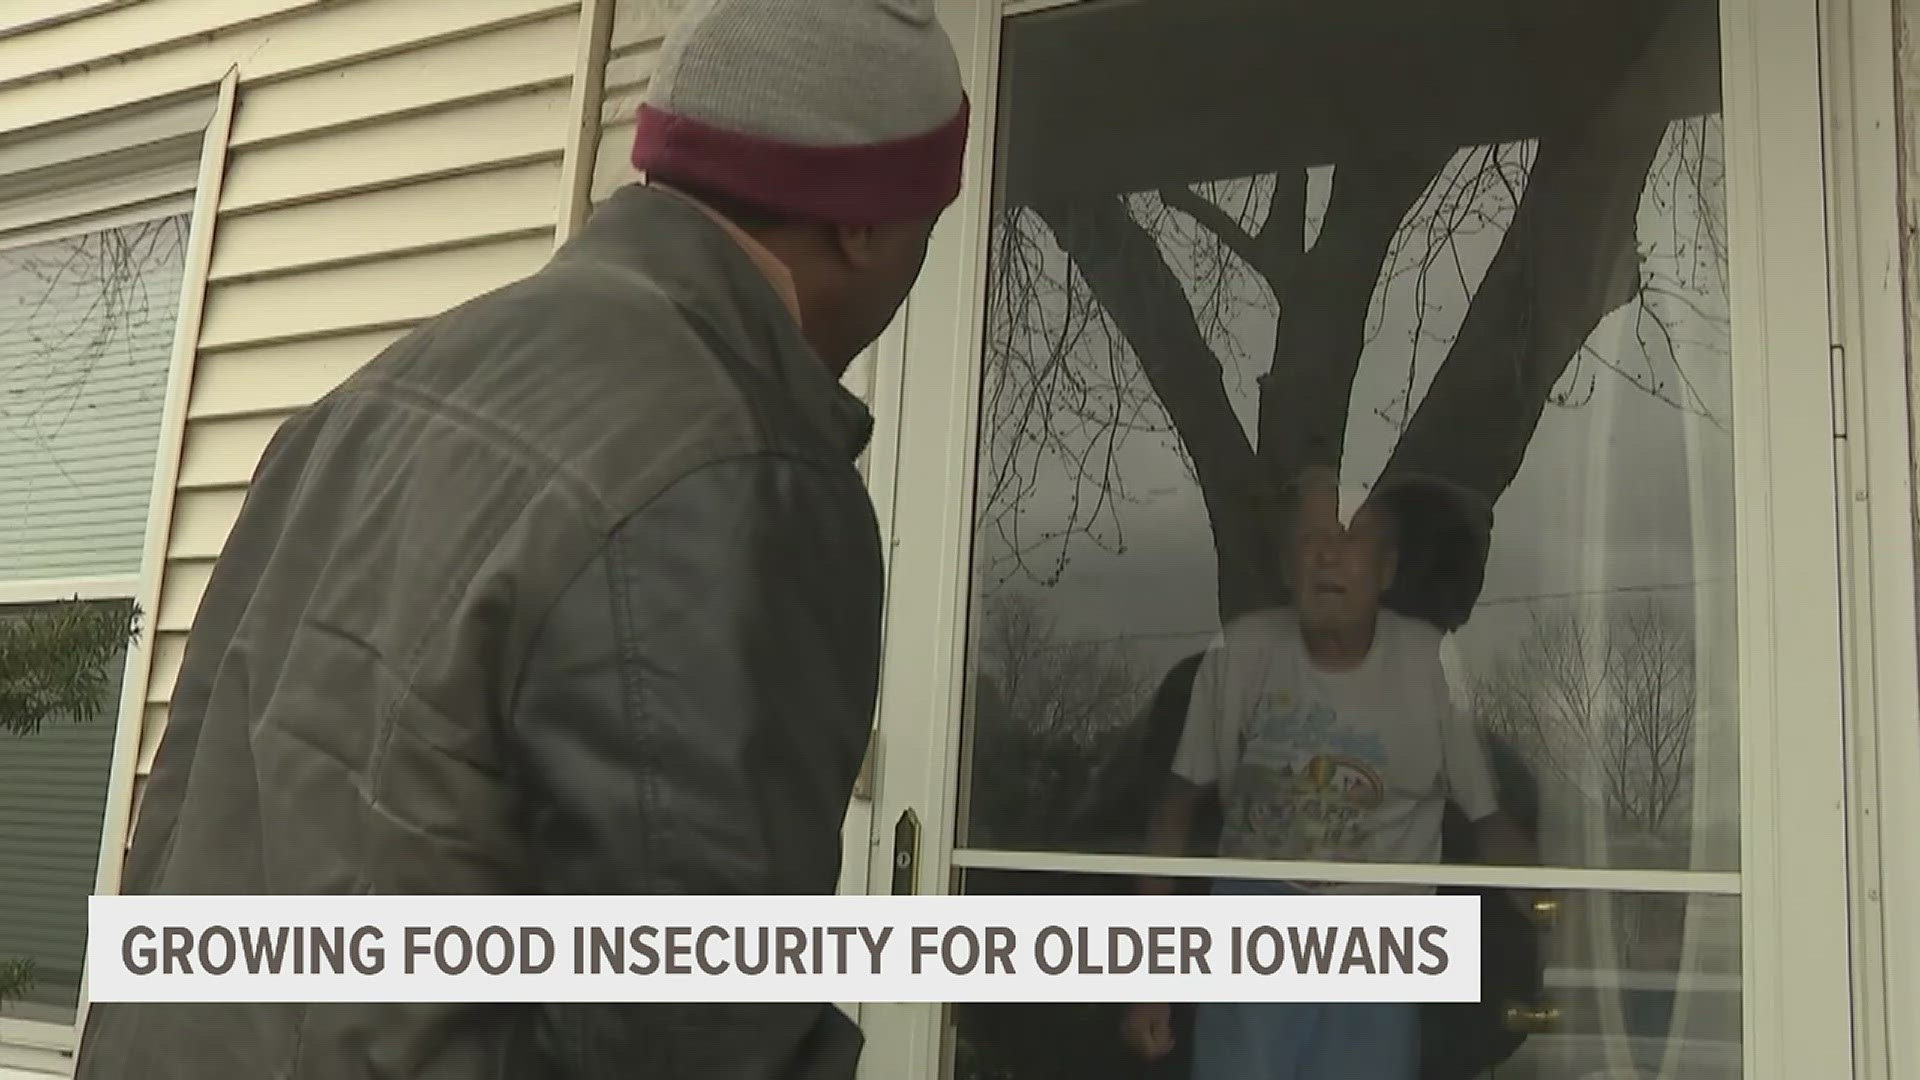 Last year, Milestones delivered nearly 300,000 meals to 17 eastern Iowa counties.